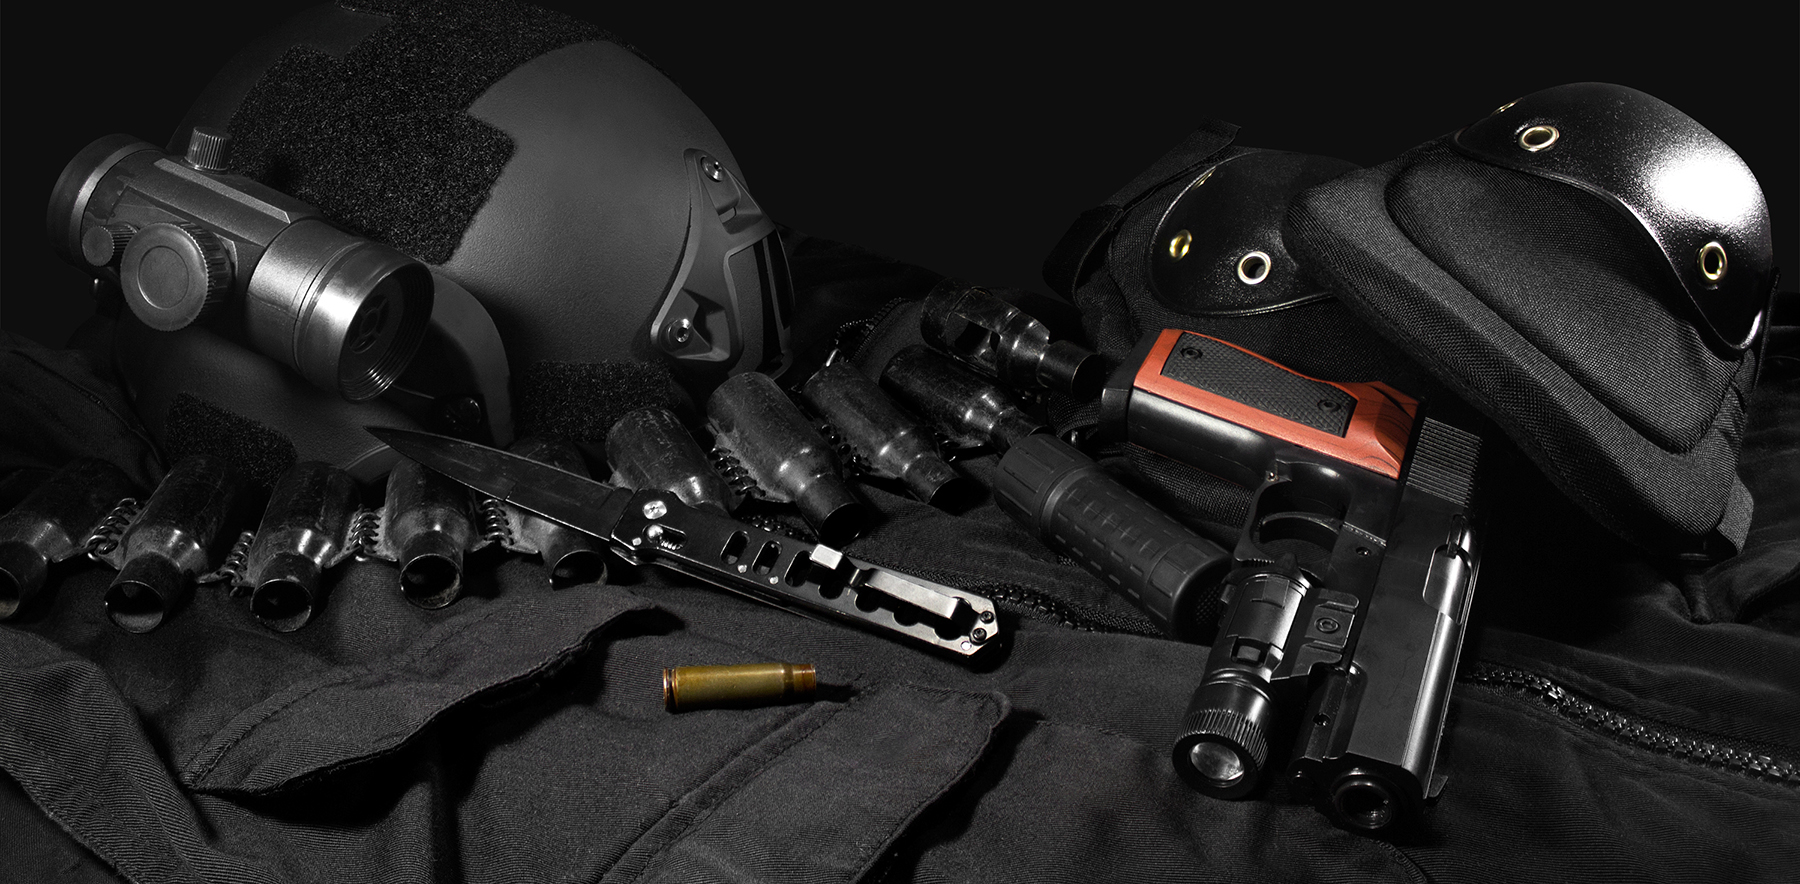 Tactical gear laying composition. Black military ammunition tactical gun, helmet, gloves, cartridge belt, bandolier, gun shell, knife, binocular and knee protection laying on a black table.